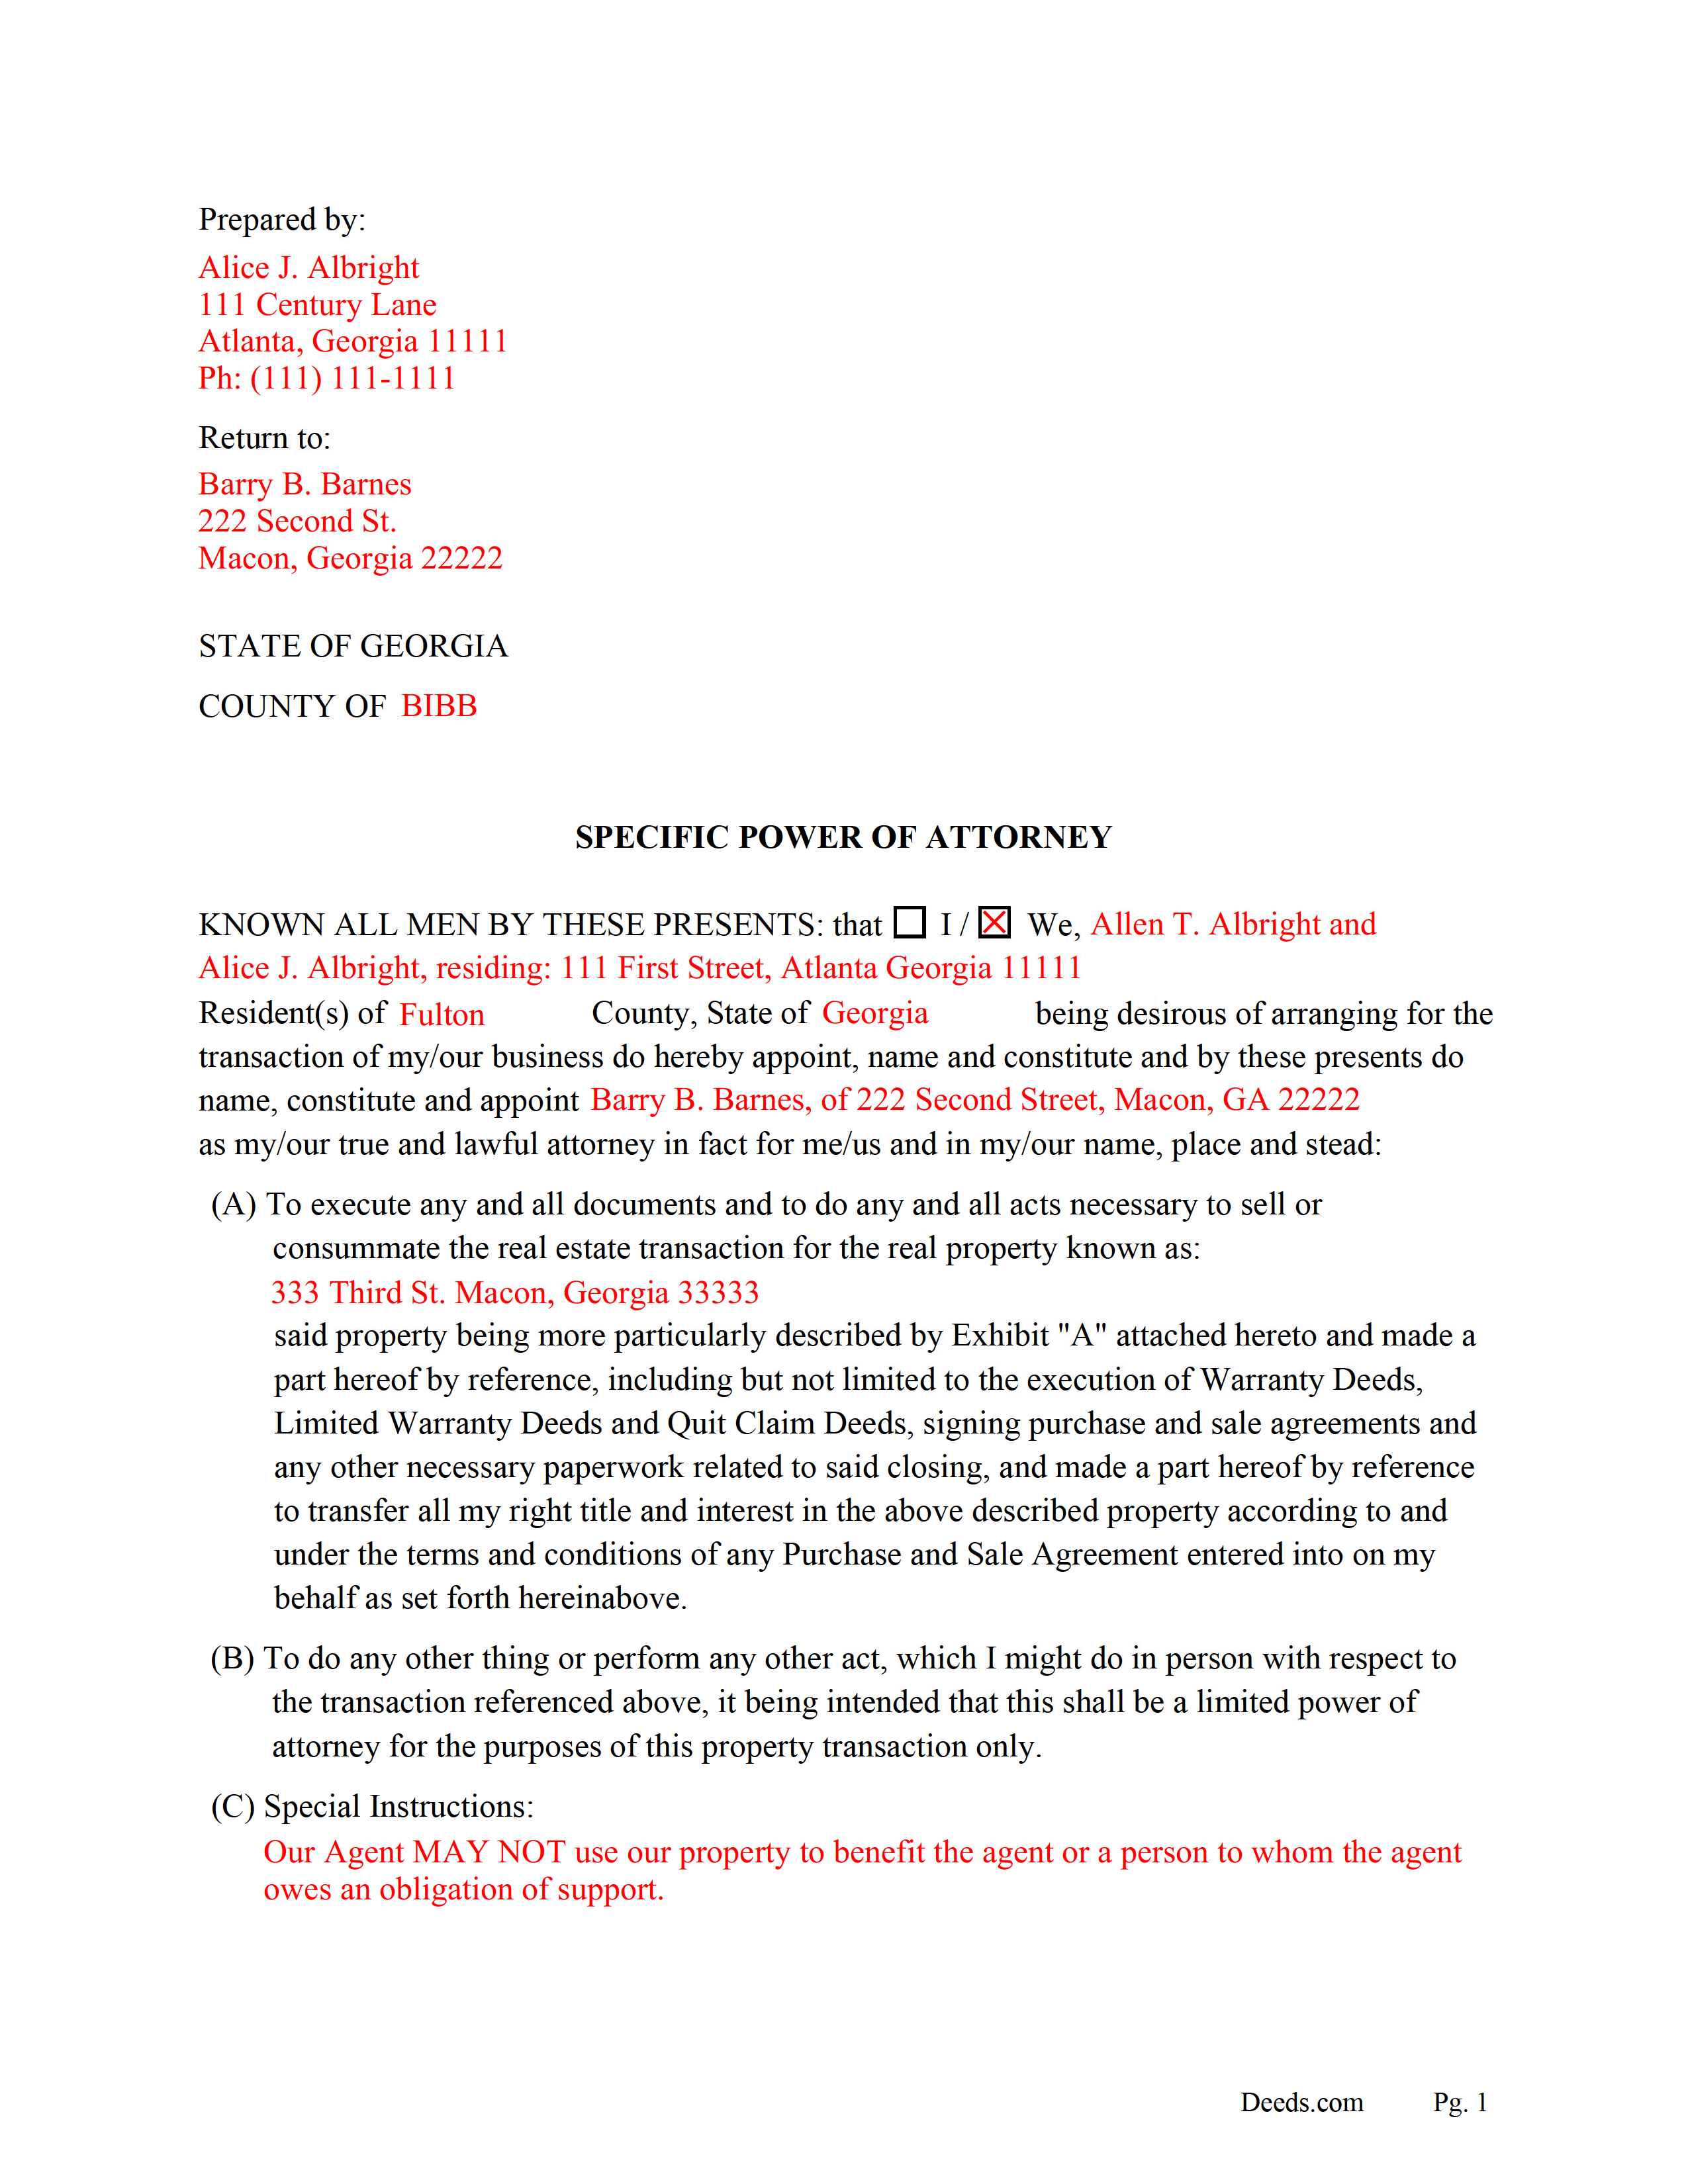 Completed Example of the Special Power of Attorney Document